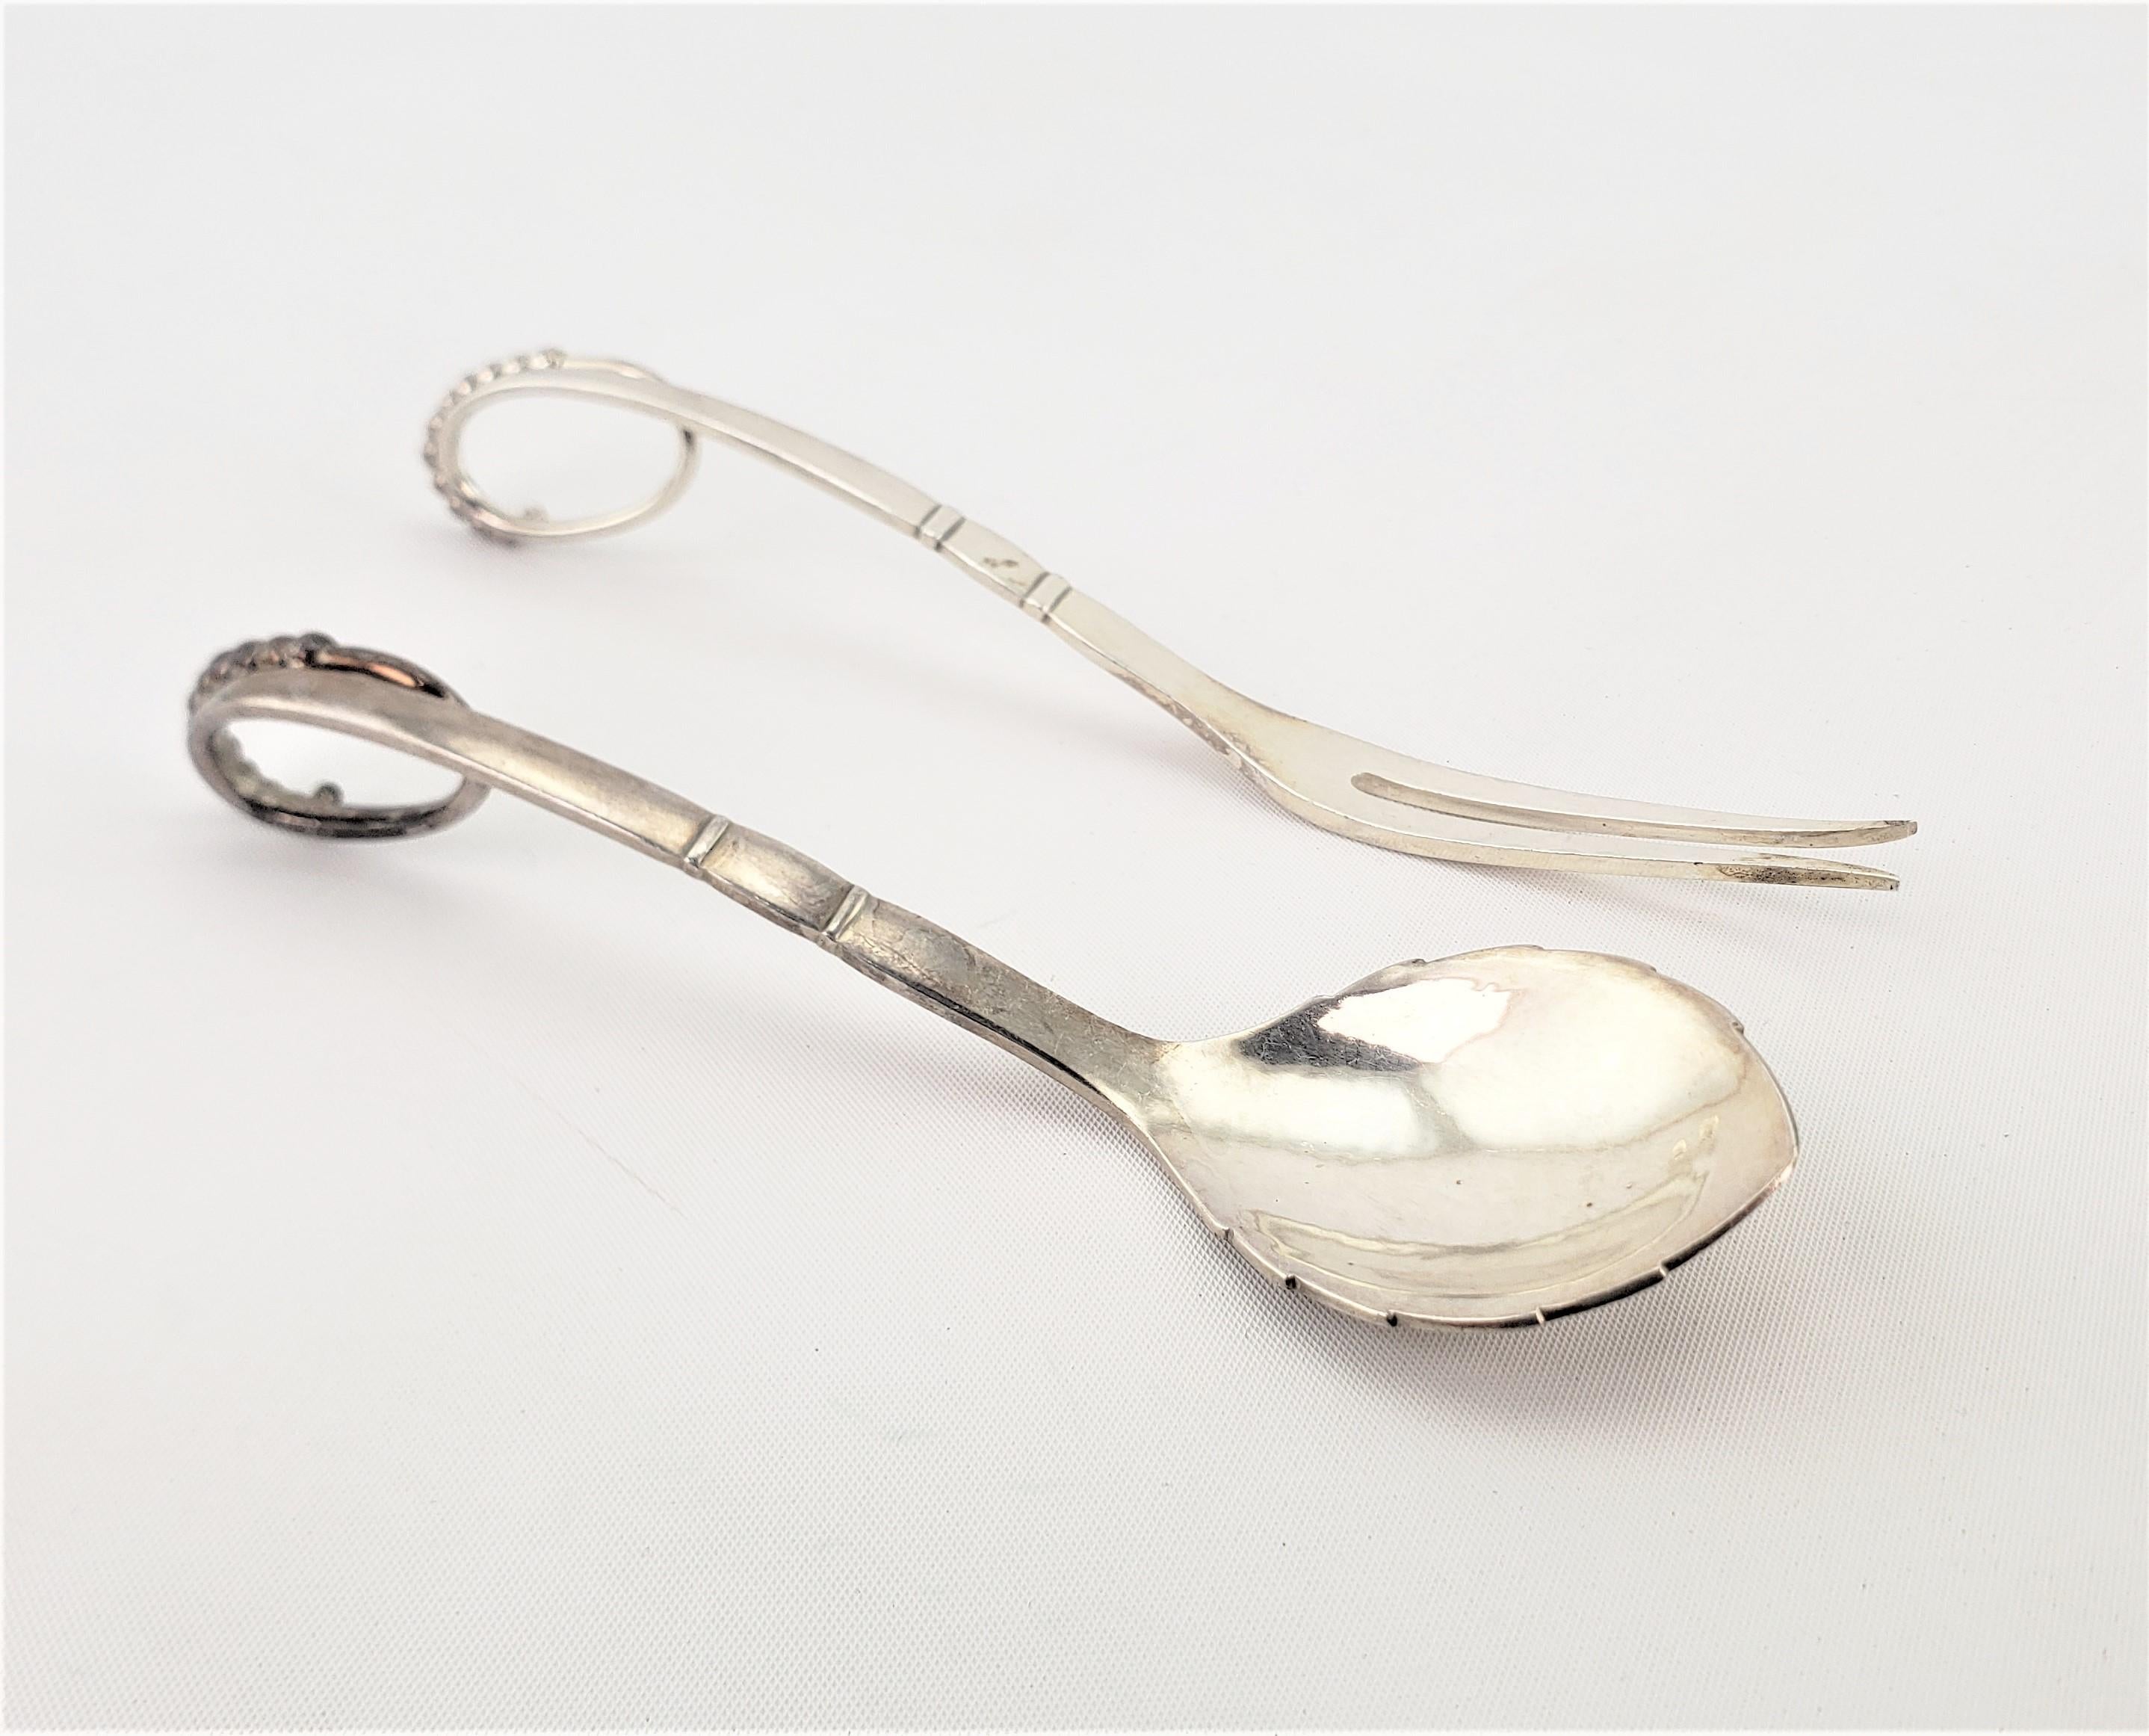 This sterling silver fork and knife set were made by the renowned Georg Jensen of Denmark in his Blossom pattern in a naturalistic or organic style. Both pieces are clearly hallmarked, and bear the maker's mark for Jensen dating to approximately